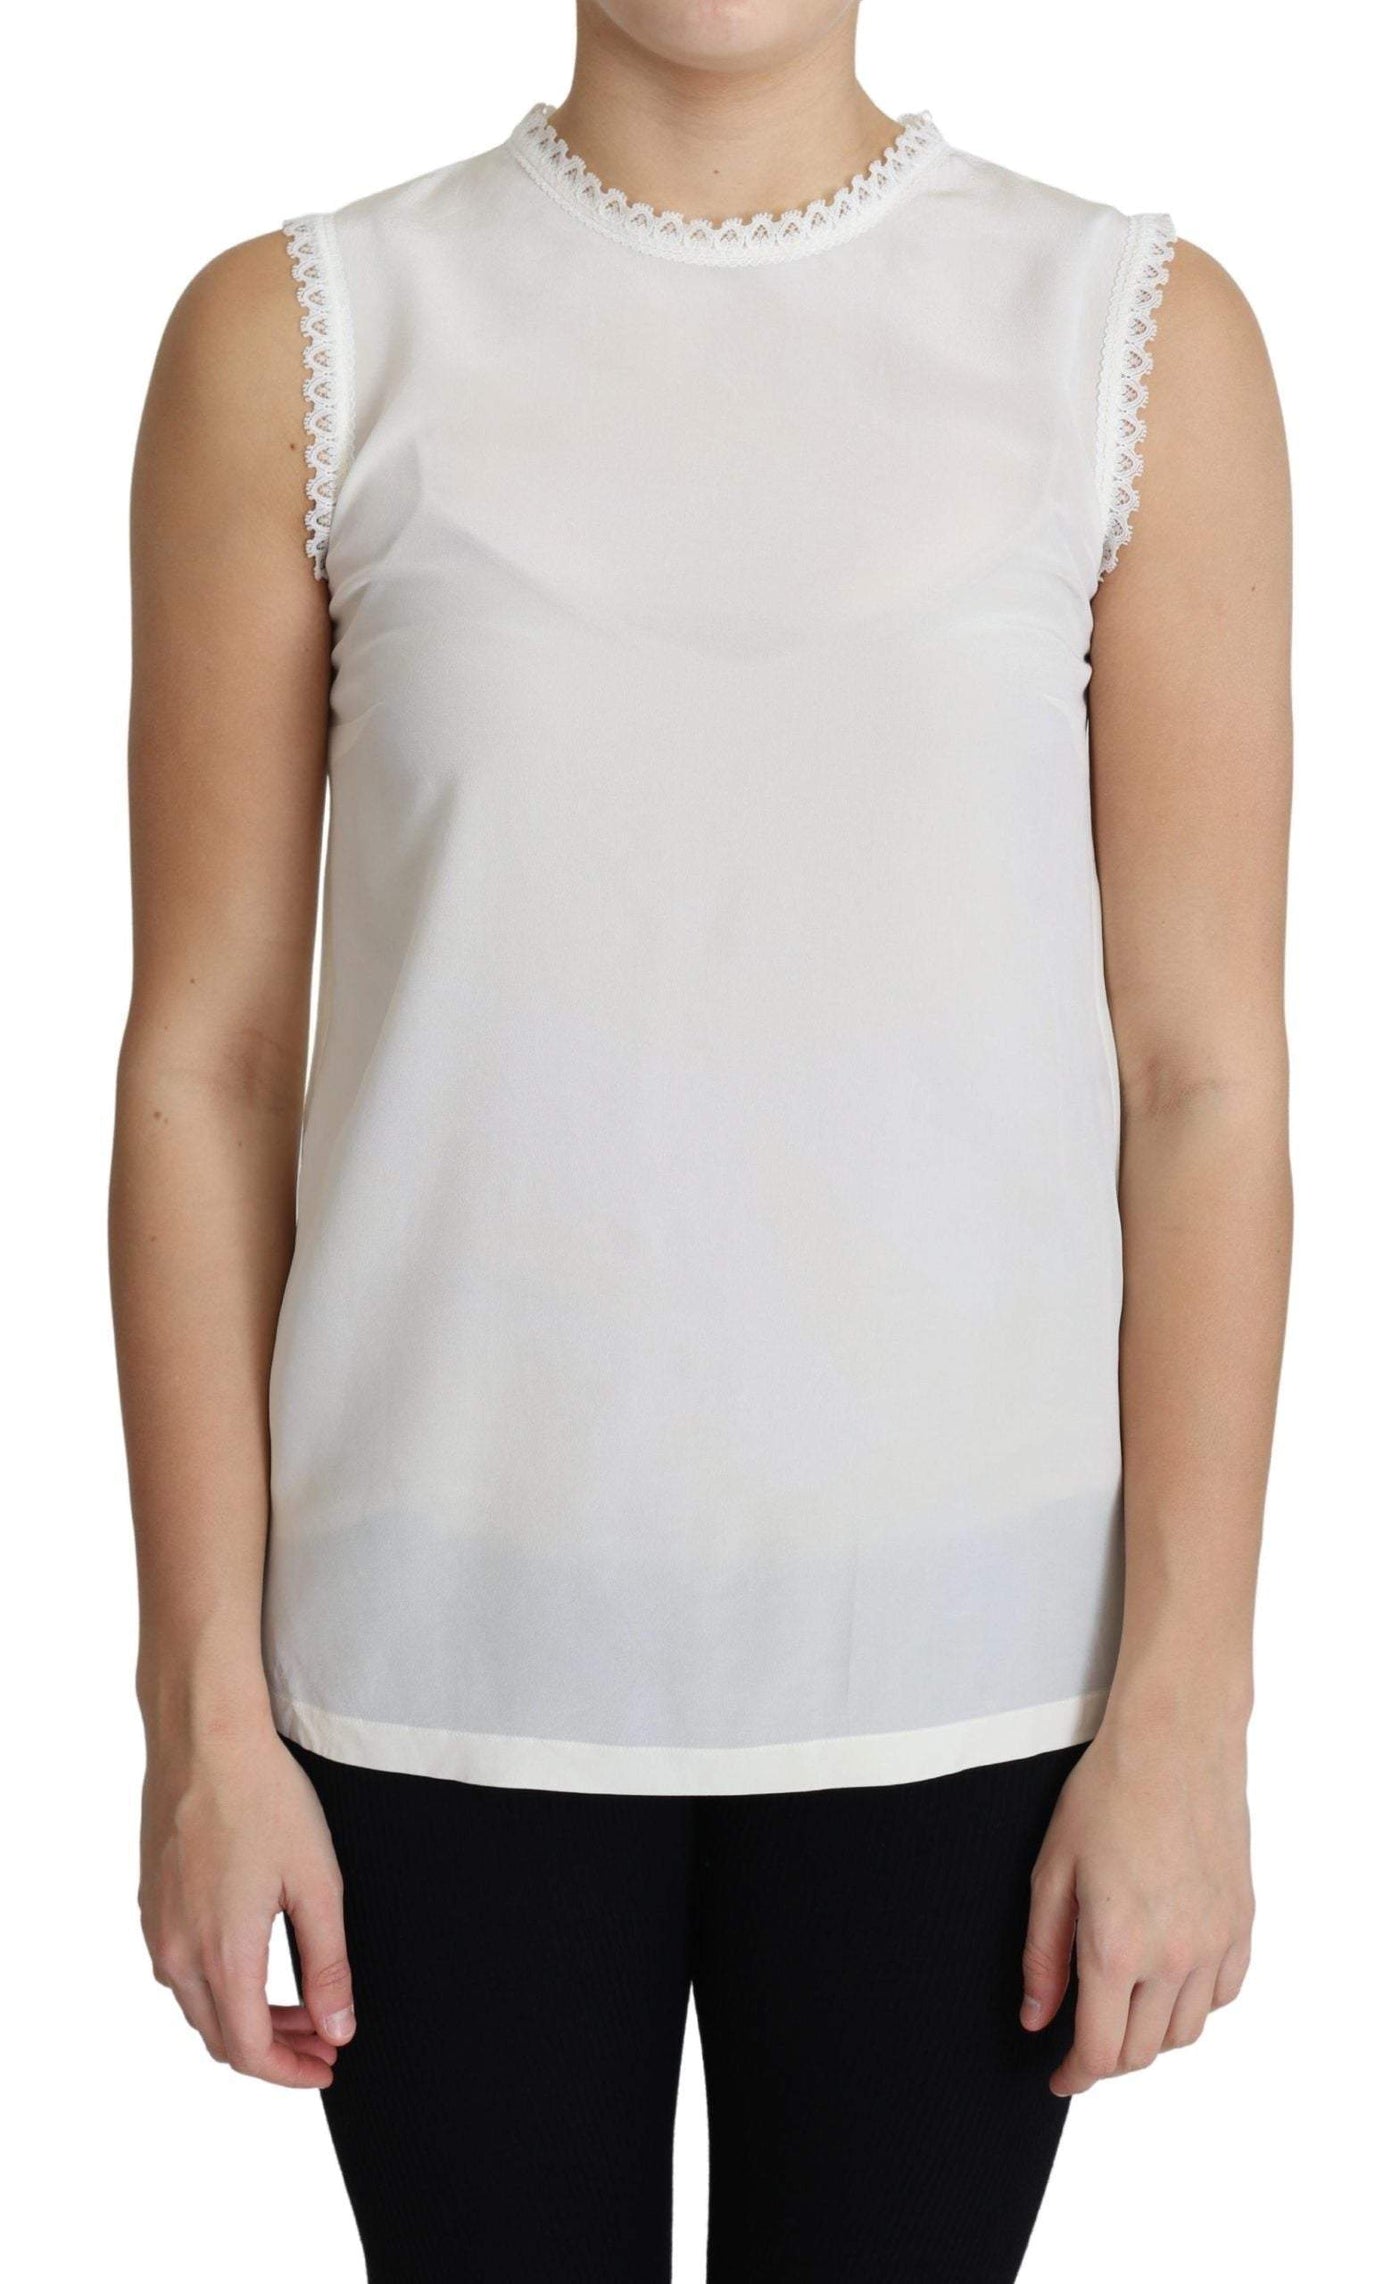 Dolce & Gabbana White Blouse Silk Lace Trimmed Sleeveless Top #women, Dolce & Gabbana, feed-agegroup-adult, feed-color-White, feed-gender-female, feed-size-IT38|XS, IT38|XS, Tops & T-Shirts - Women - Clothing, White, Women - New Arrivals at SEYMAYKA